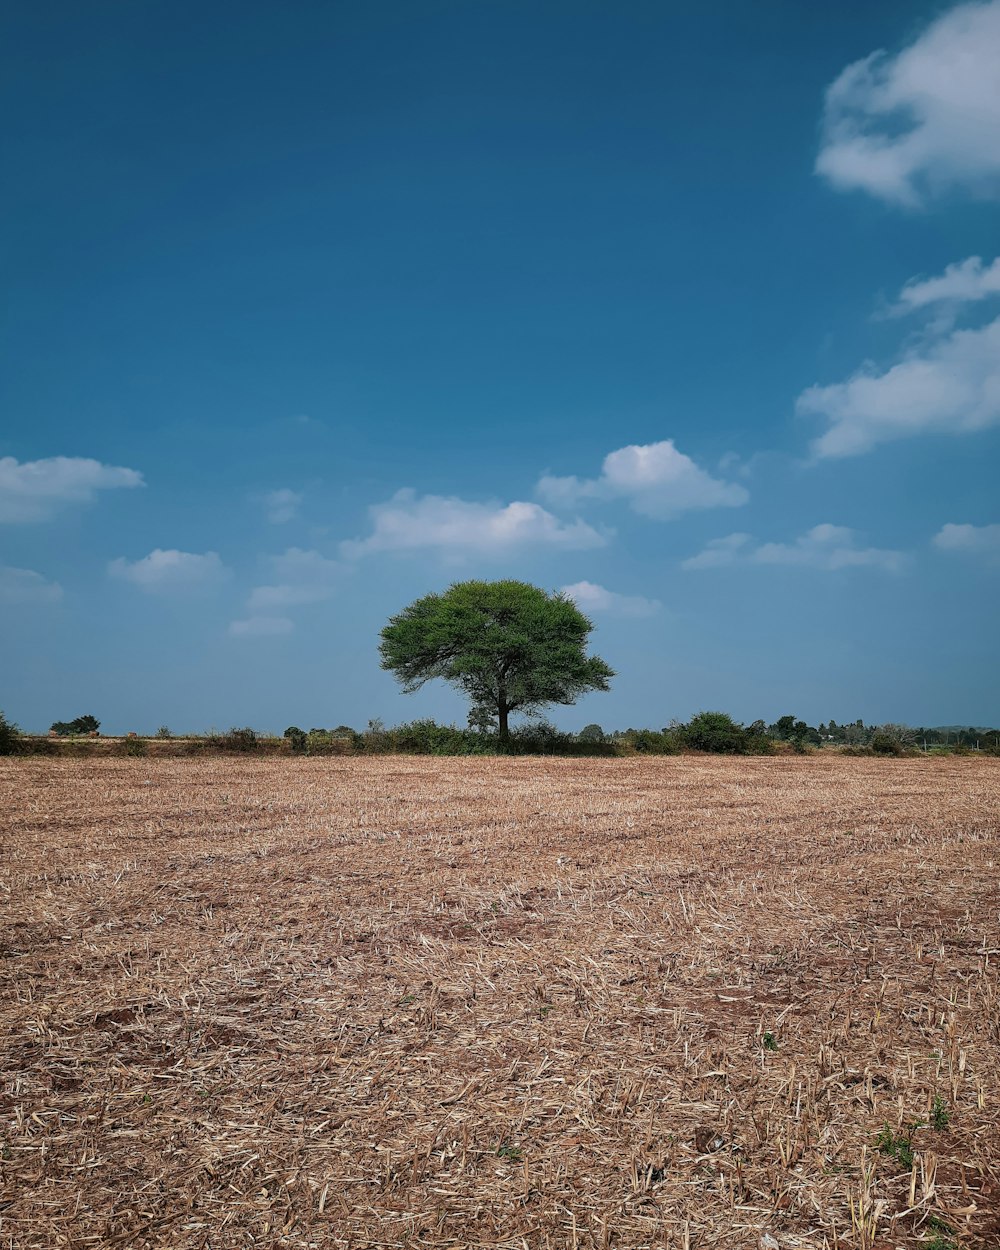 a lone tree stands alone in the middle of a field